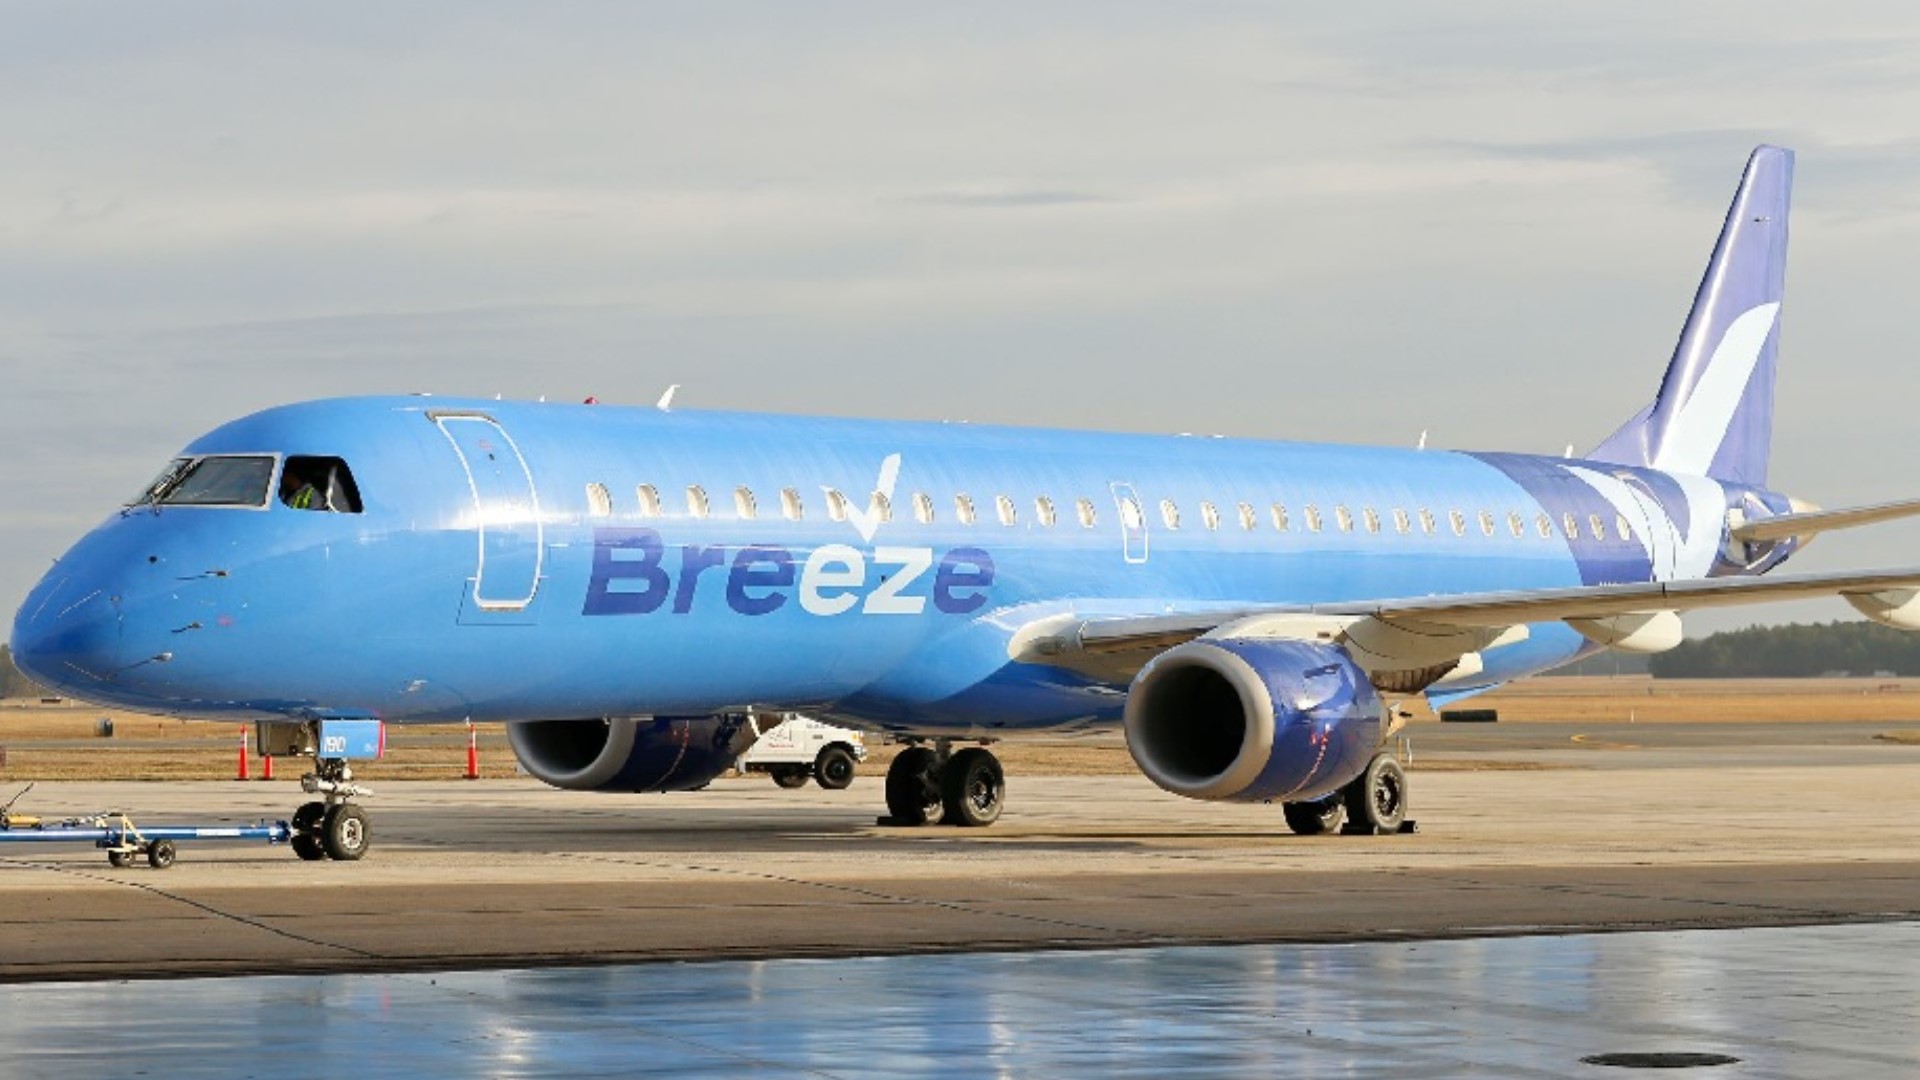 Breeze currently offers four destinations from Columbus including Charleston, SC; Hartford, CT; New Orleans, LA; and West Palm Beach, FL.